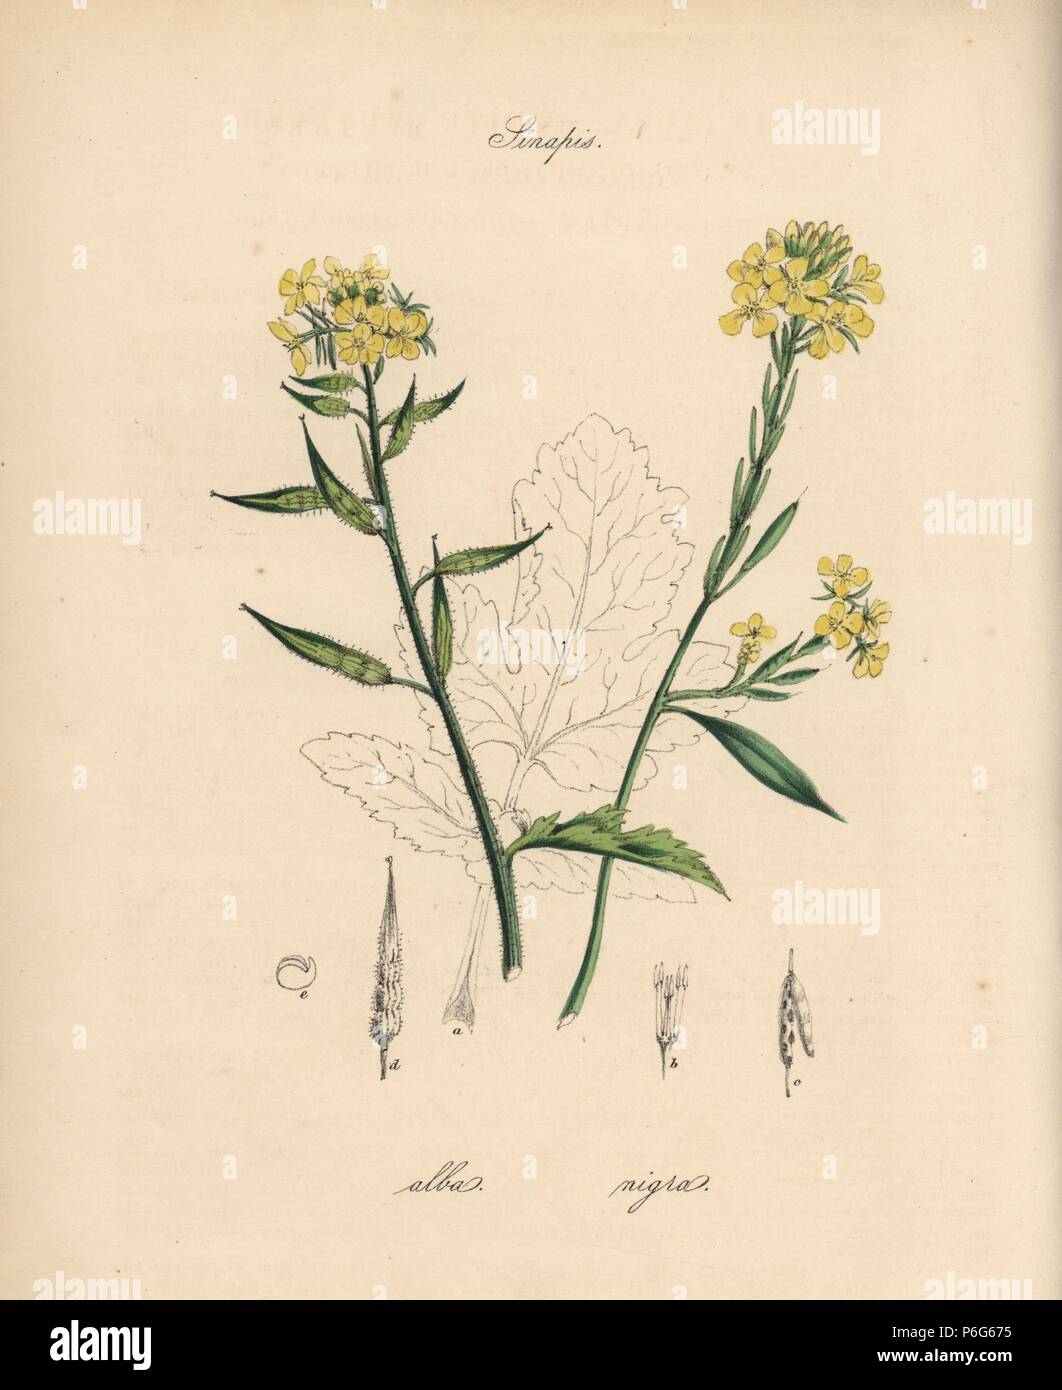 White and black mustard, Sinapis alba and Sinapis nigra. Handcoloured zincograph by C. Chabot drawn by Miss M. A. Burnett from her 'Plantae Utiliores: or Illustrations of Useful Plants,' Whittaker, London, 1842. Miss Burnett drew the botanical illustrations, but the text was chiefly by her late brother, British botanist Gilbert Thomas Burnett (1800-1835). Stock Photo